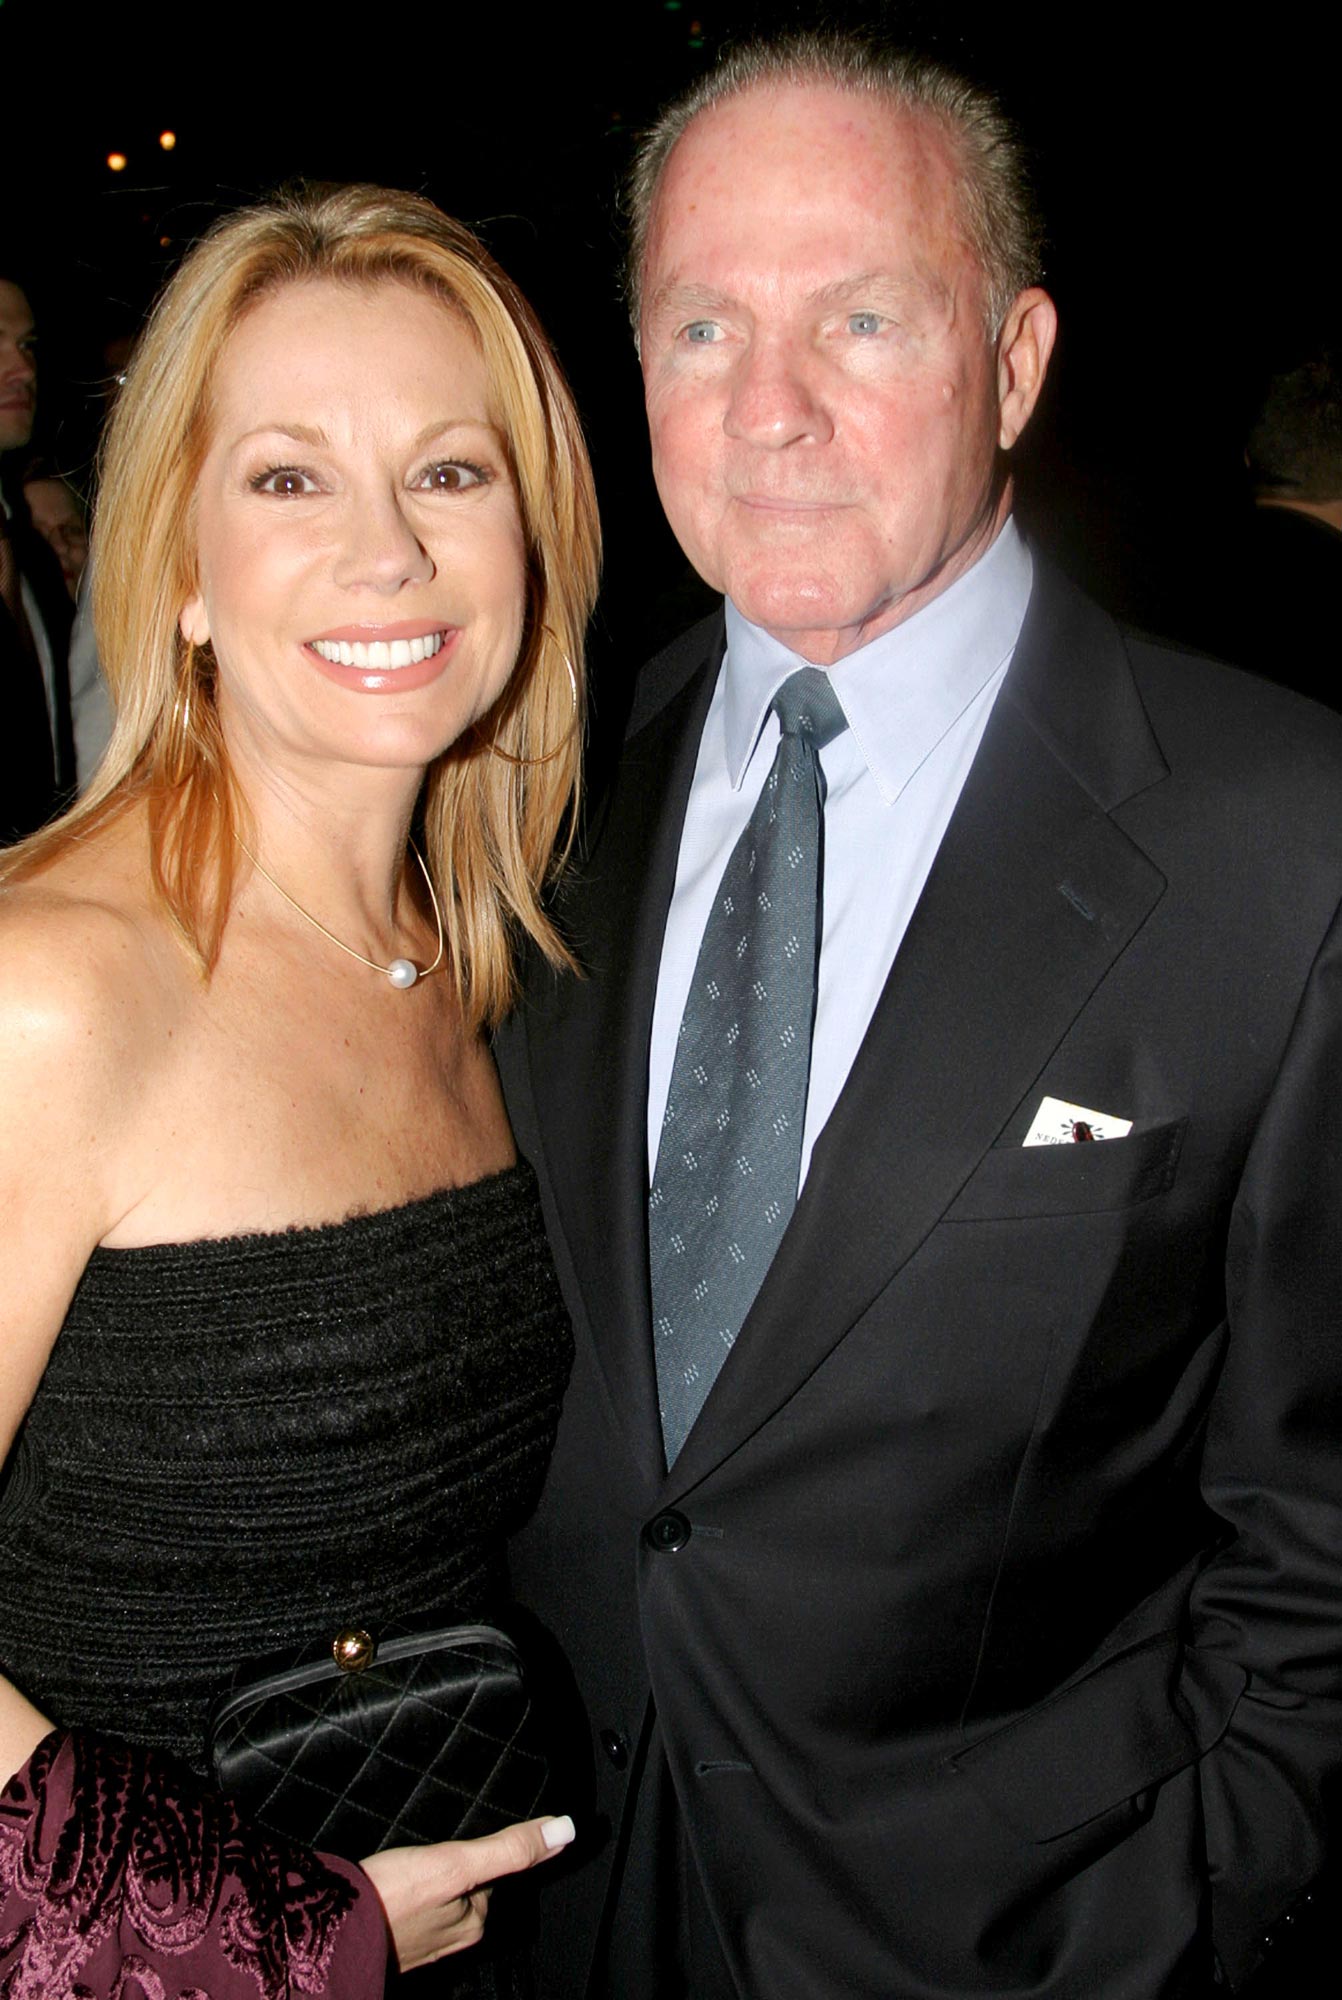 Kathie Lee Gifford Opens Up About Forgiving Late Husband s Affair With a Flight Attendant 231